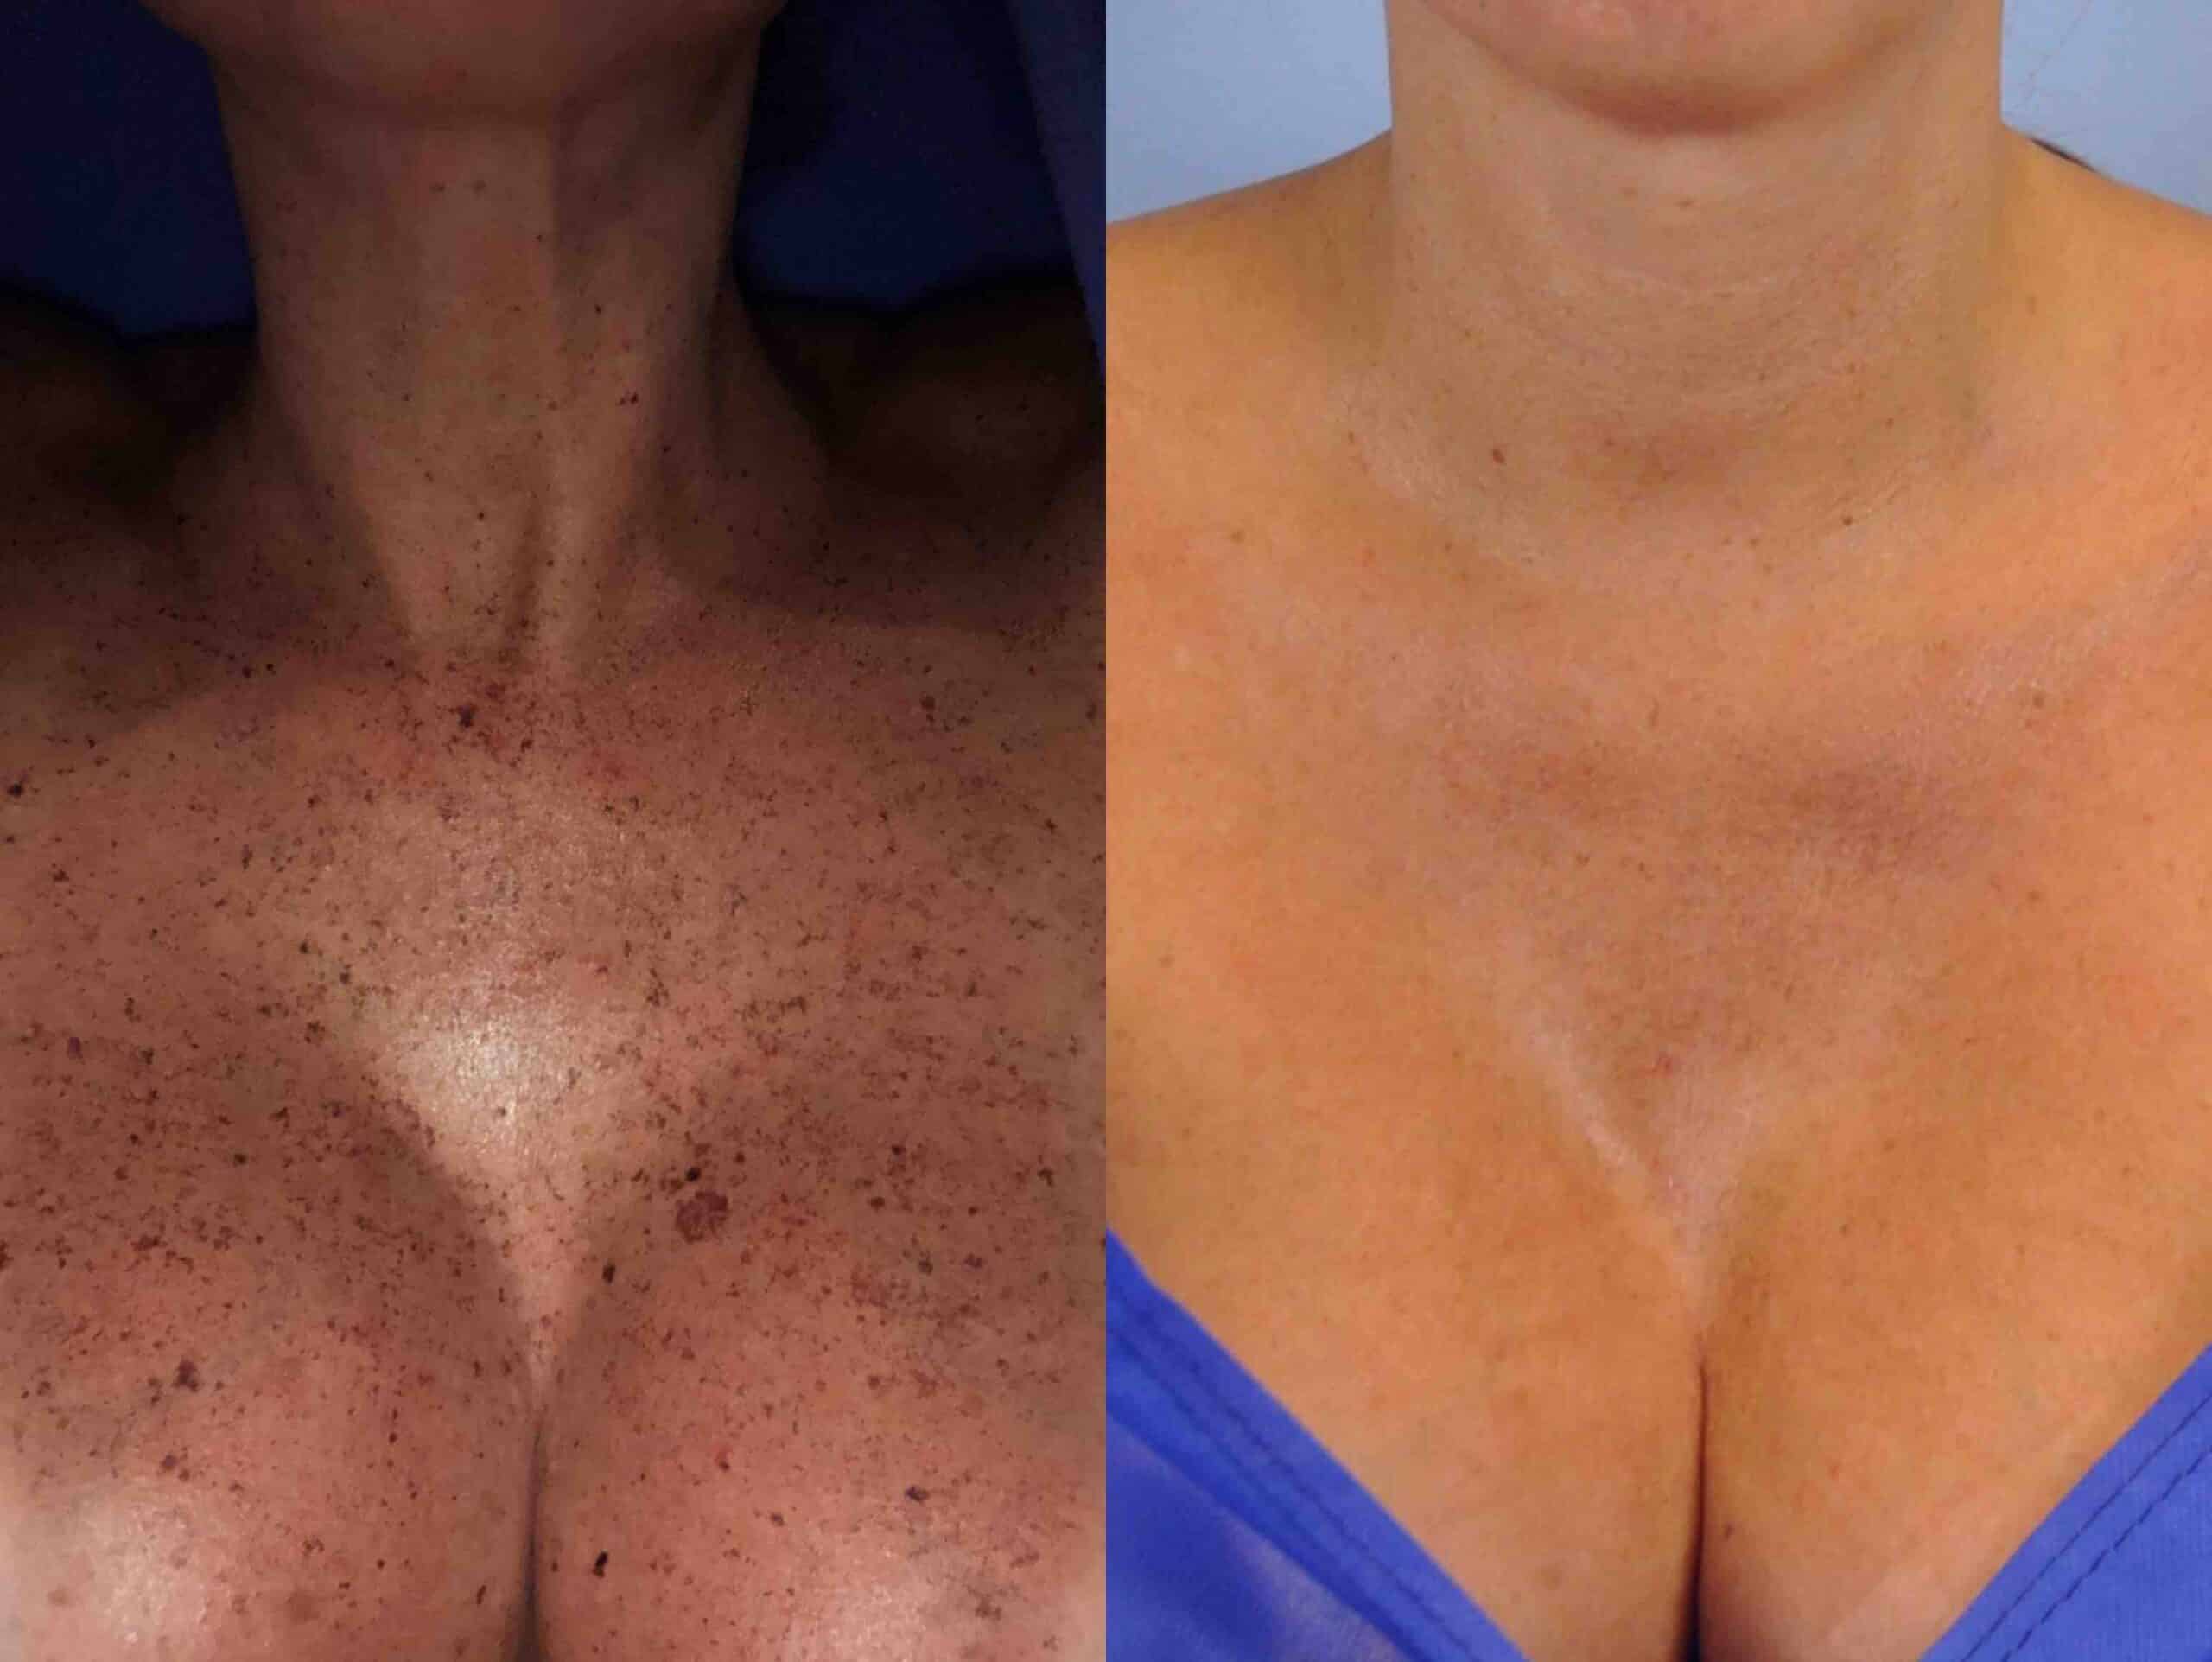 Before and after, 6 w post-treatment from Forever Young Laser BBL performed by Dr. Paul Vanek (close up, front view of chest)